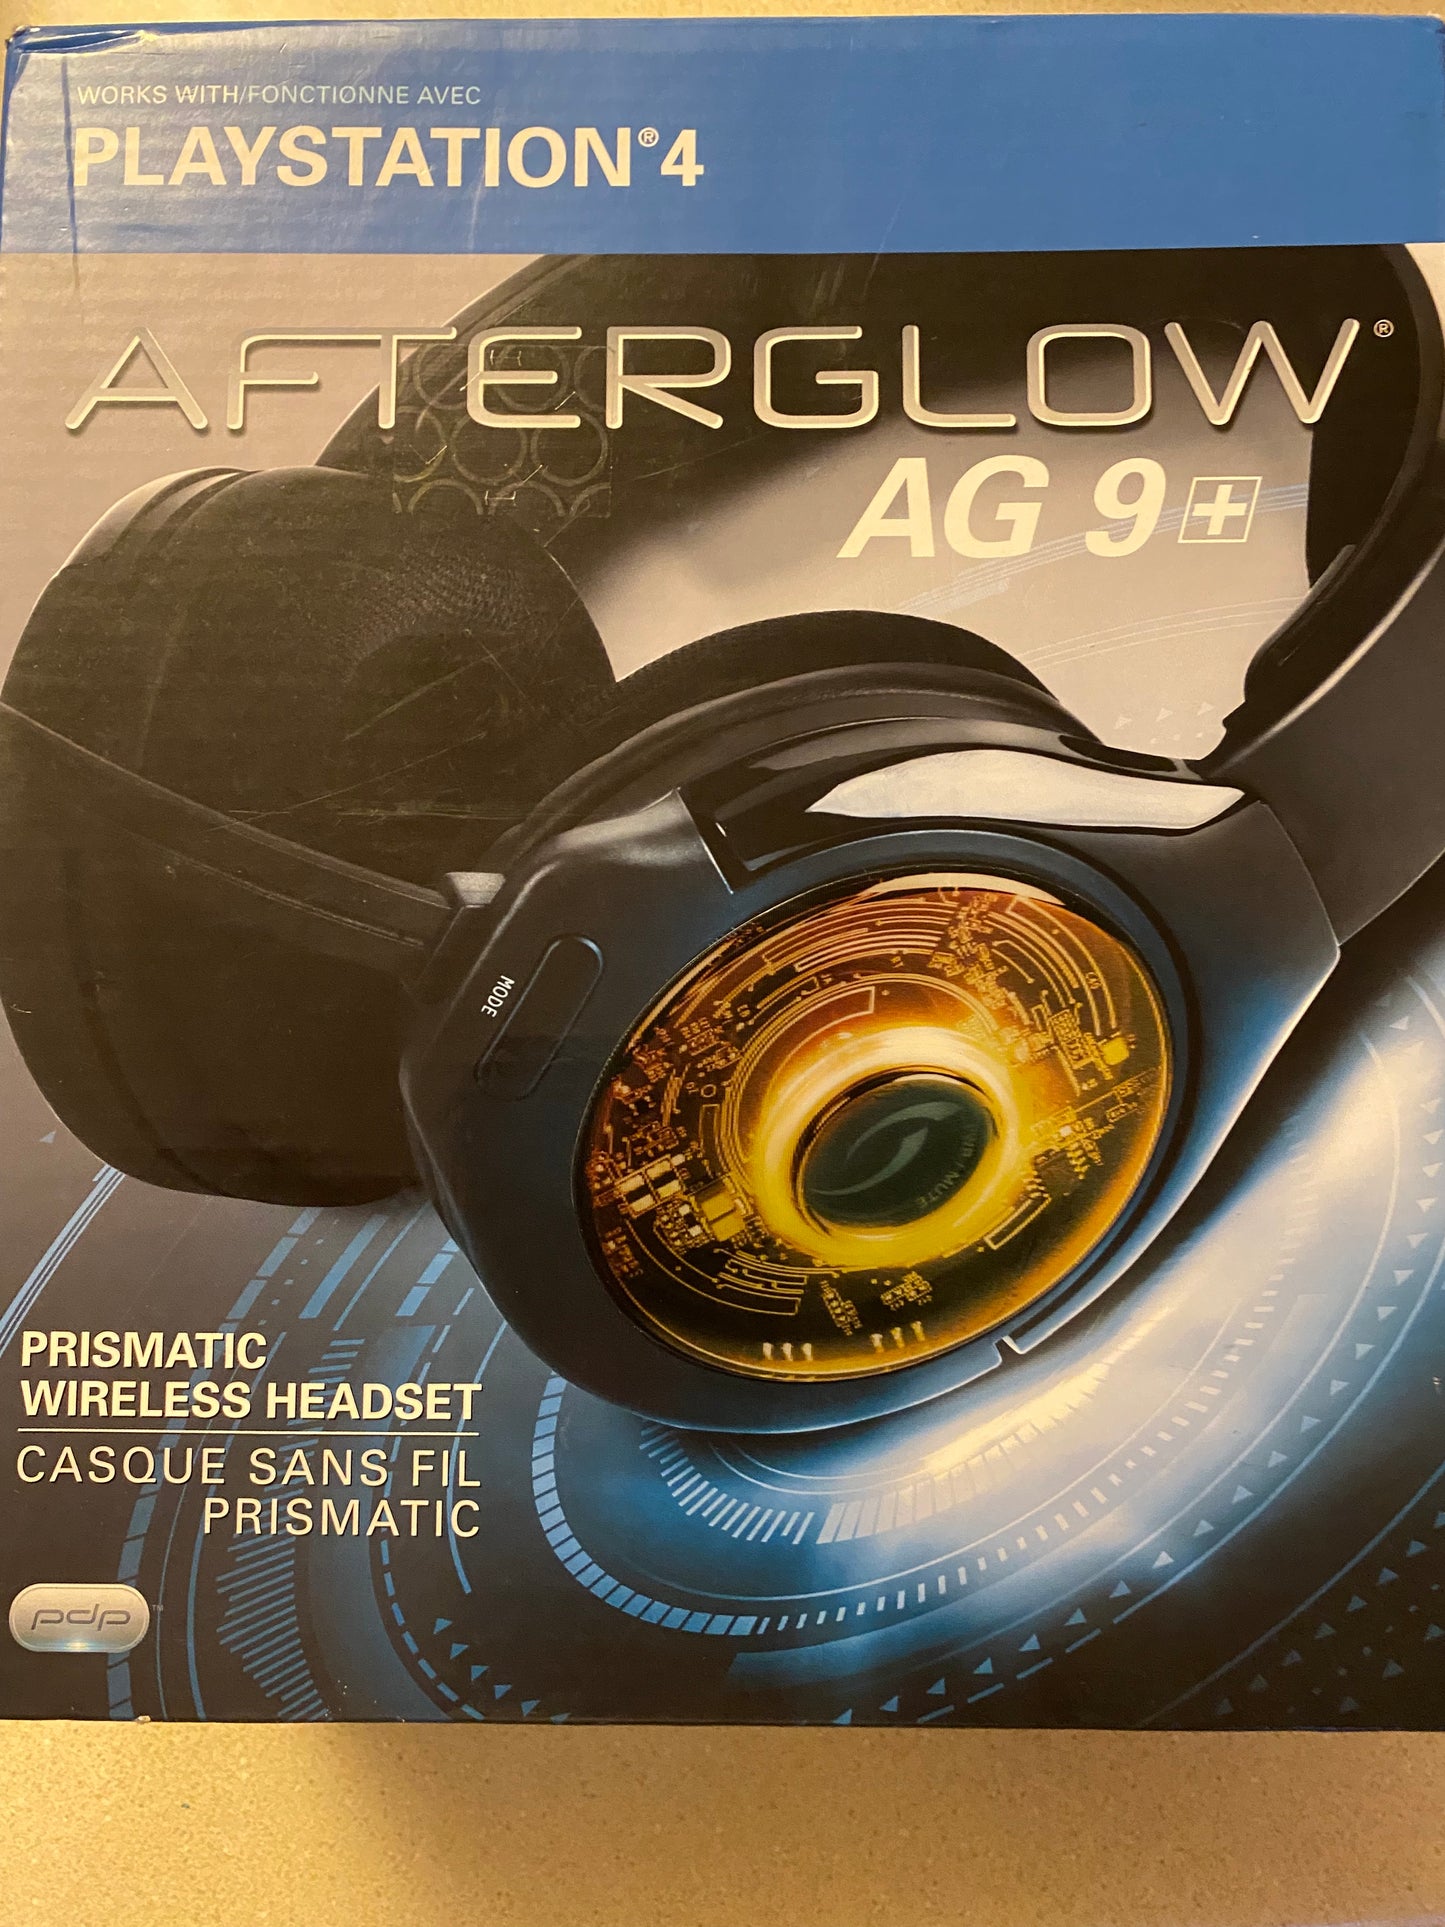 PDP Afterglow AG 9+ Prismatic Black Wireless Headset for PlayStation 4 - Open Box